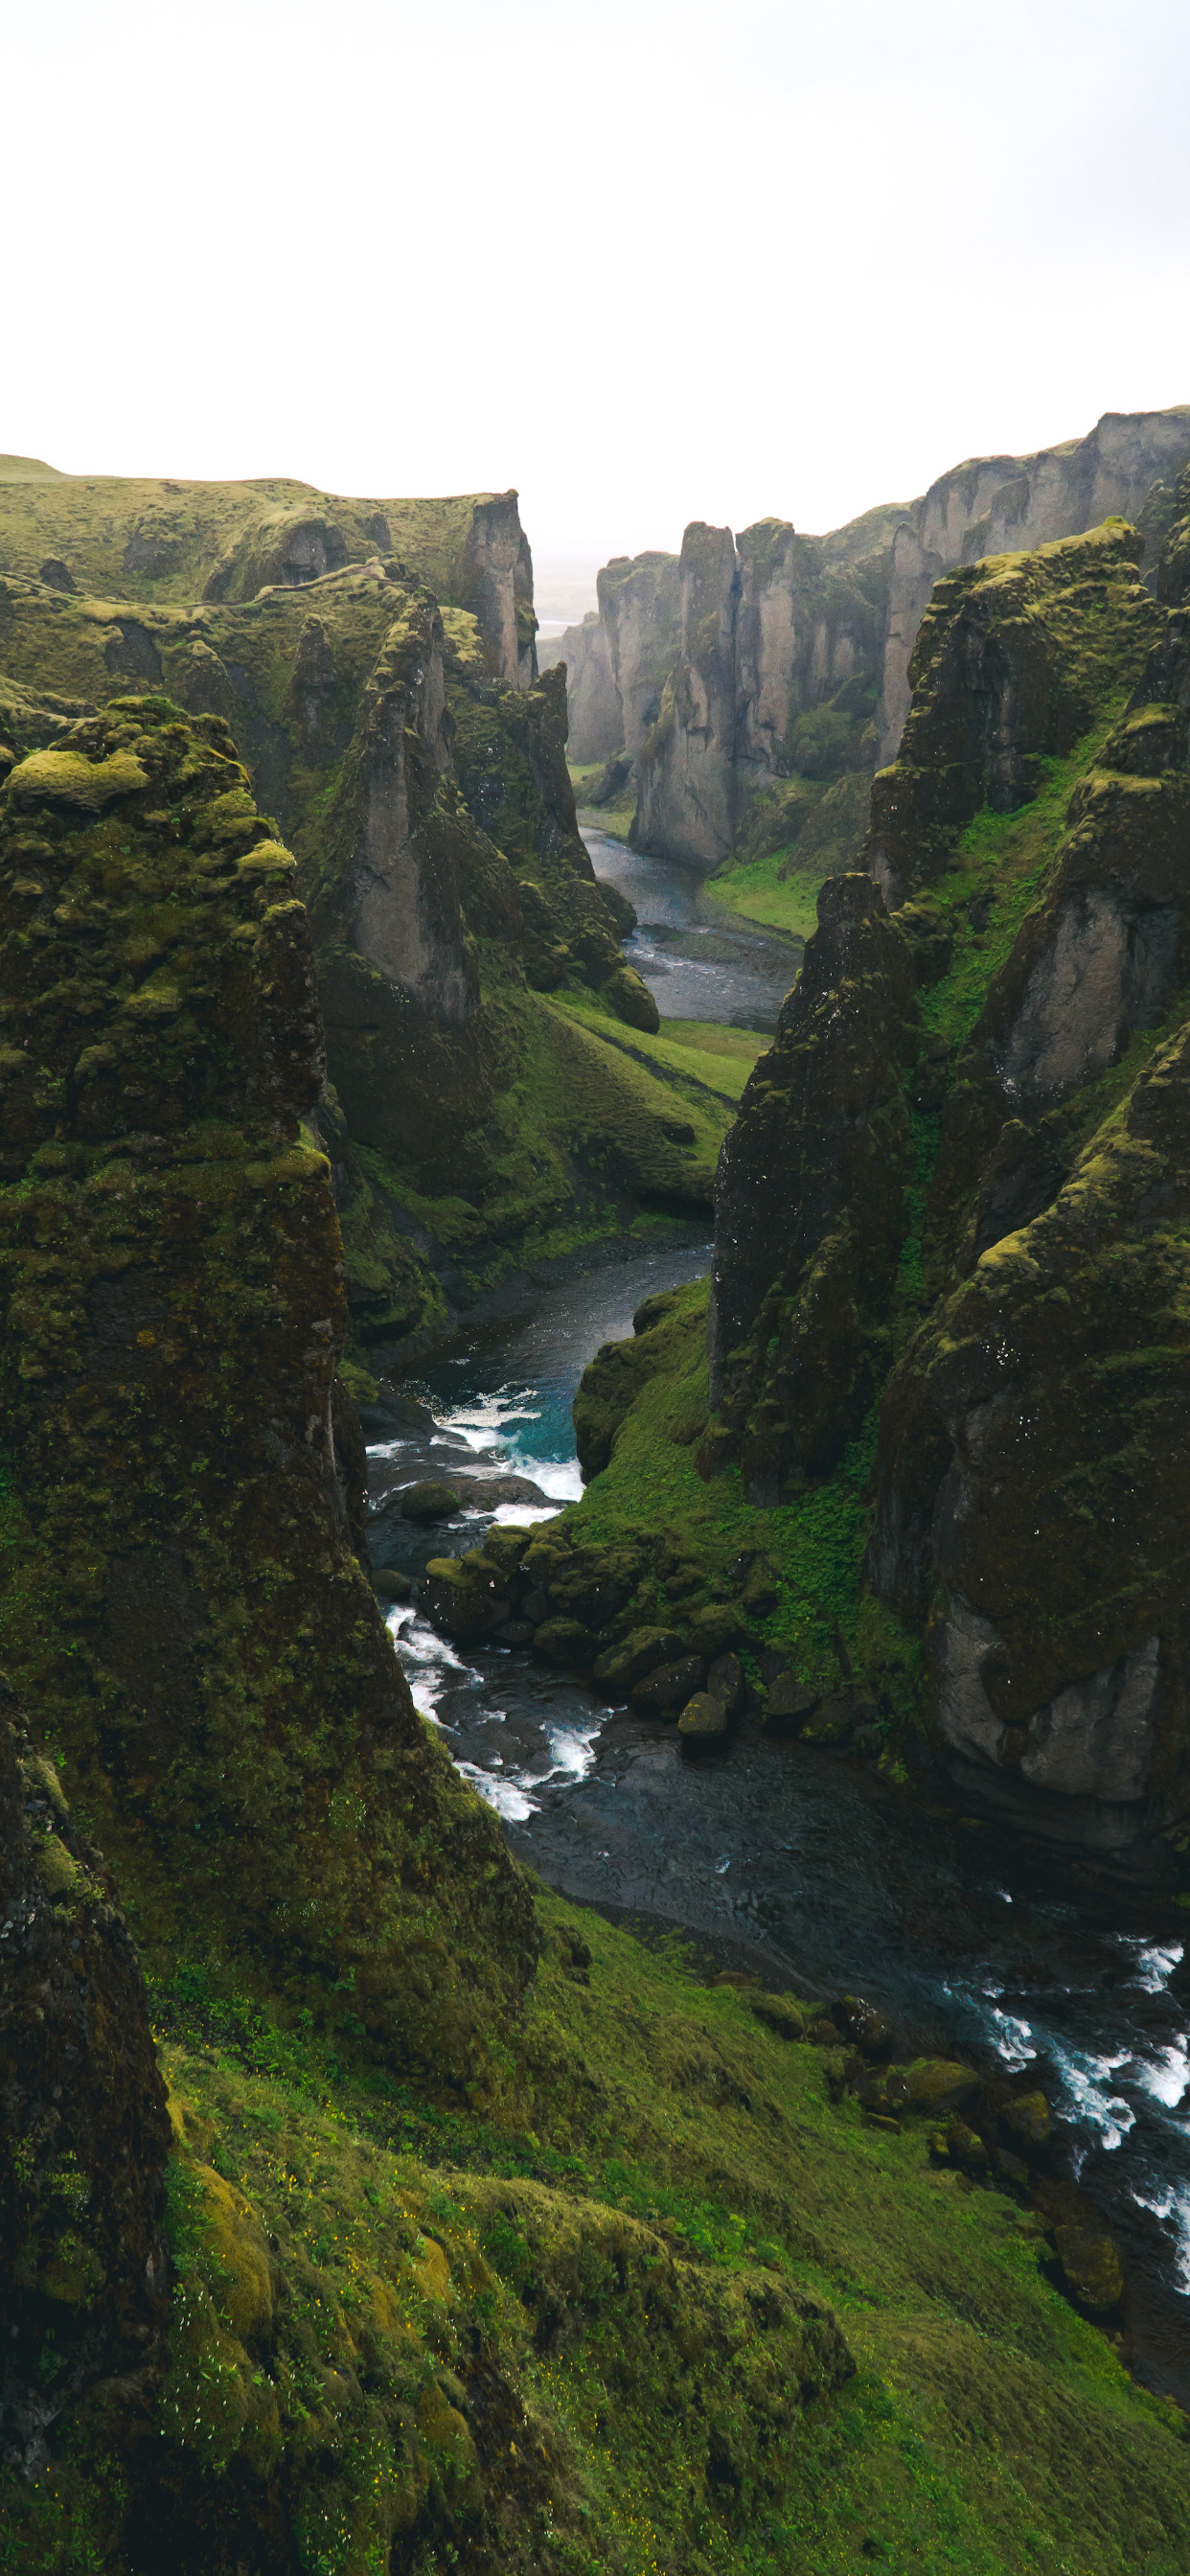 Iceland for iPhone, Stunning Wallpapers, Mobile Beauty, Photographic Delight, 1250x2690 HD Handy